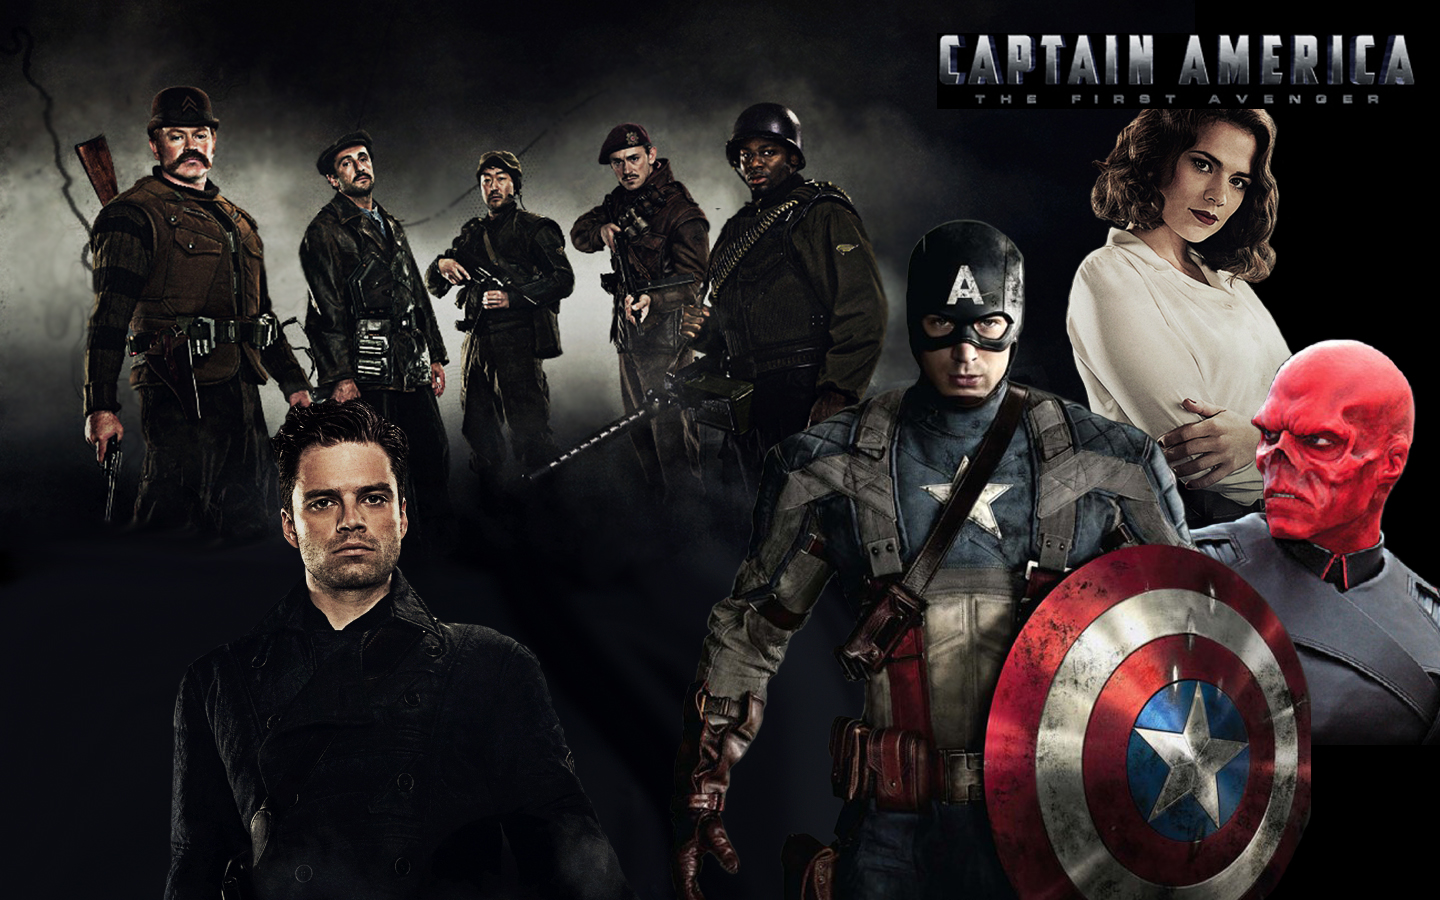 Download High quality Captain America wallpaper / Movies / 1440x900